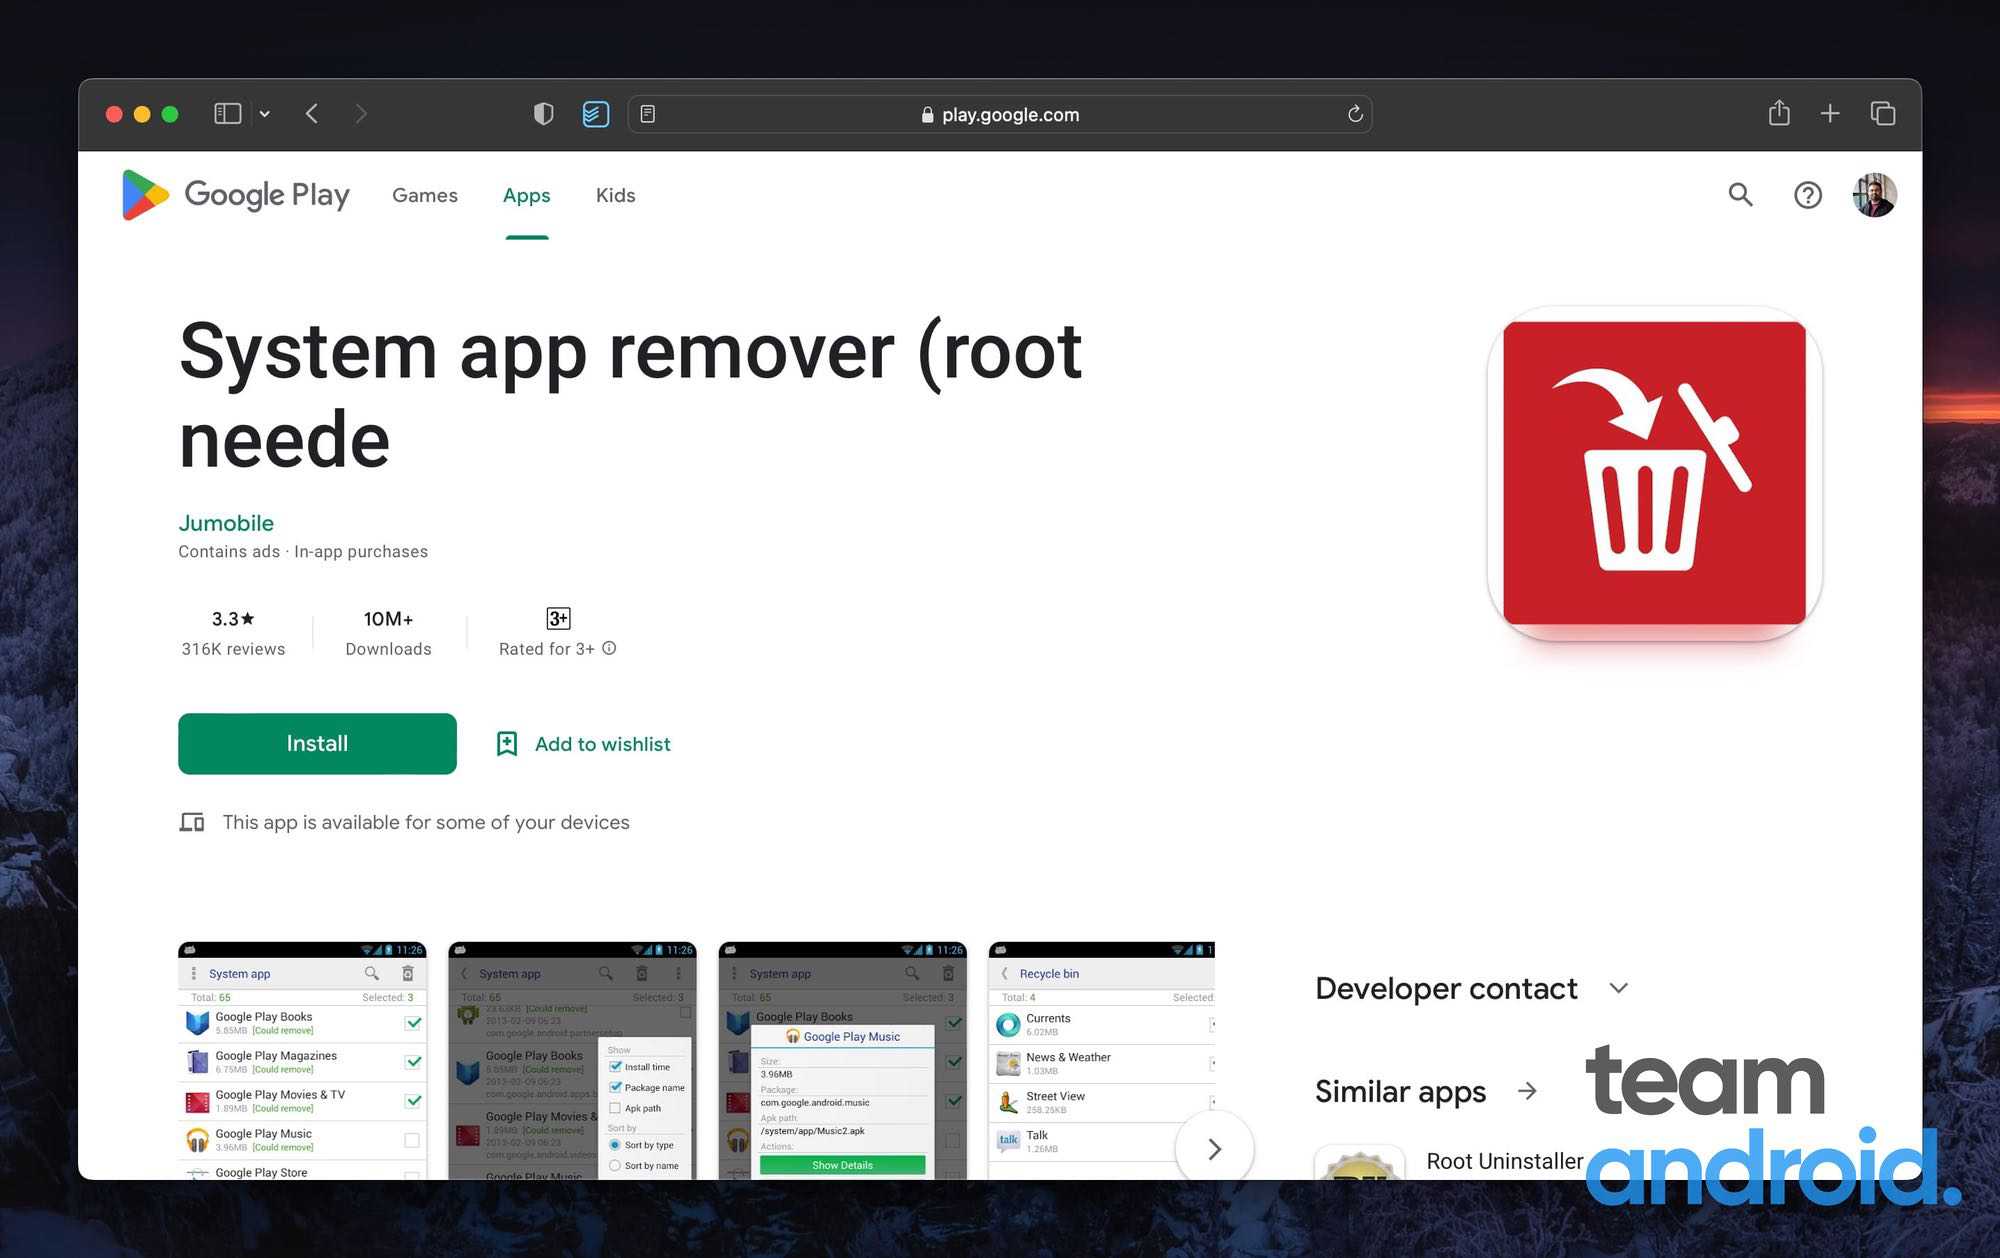 System App Remover - Google Play Store